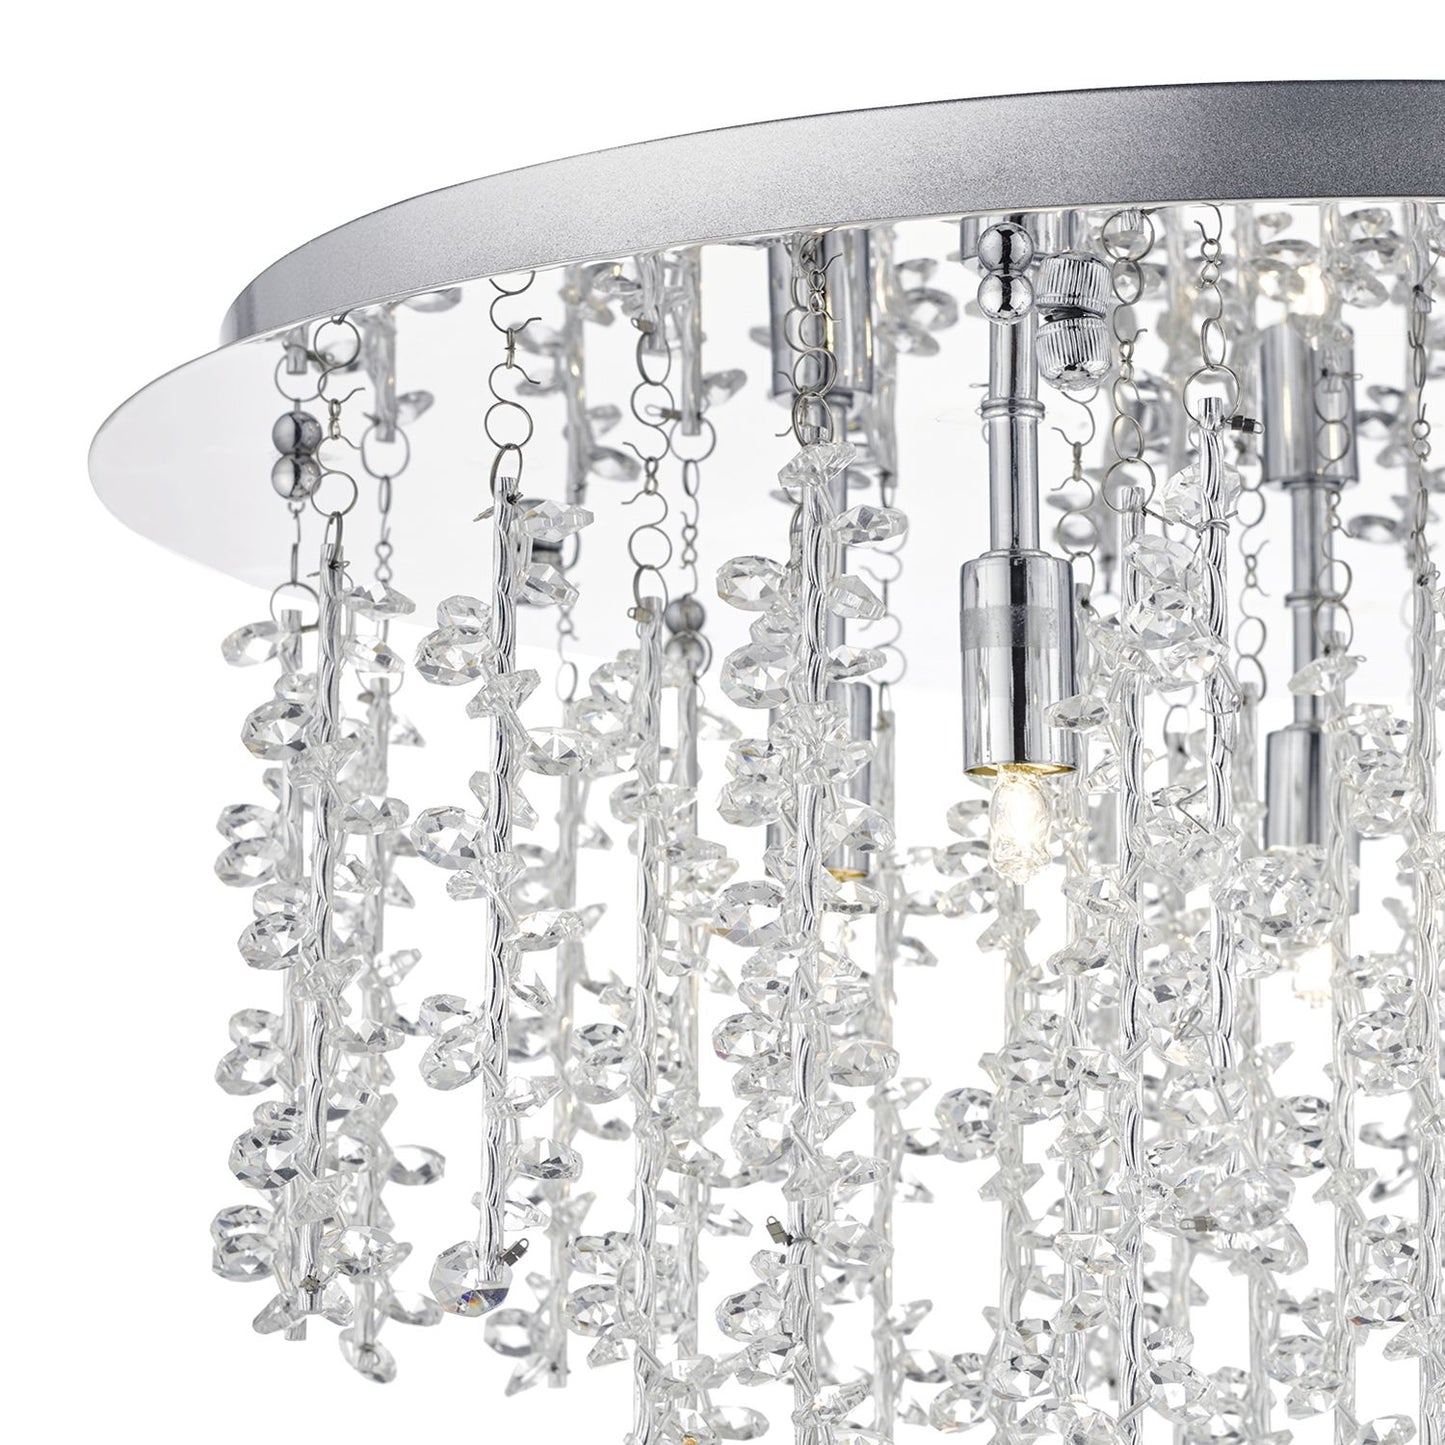 Oakleigh Polished Chrome & Crystal 5 Lamp Flush Ceiling Light - ID 5814 limited stock